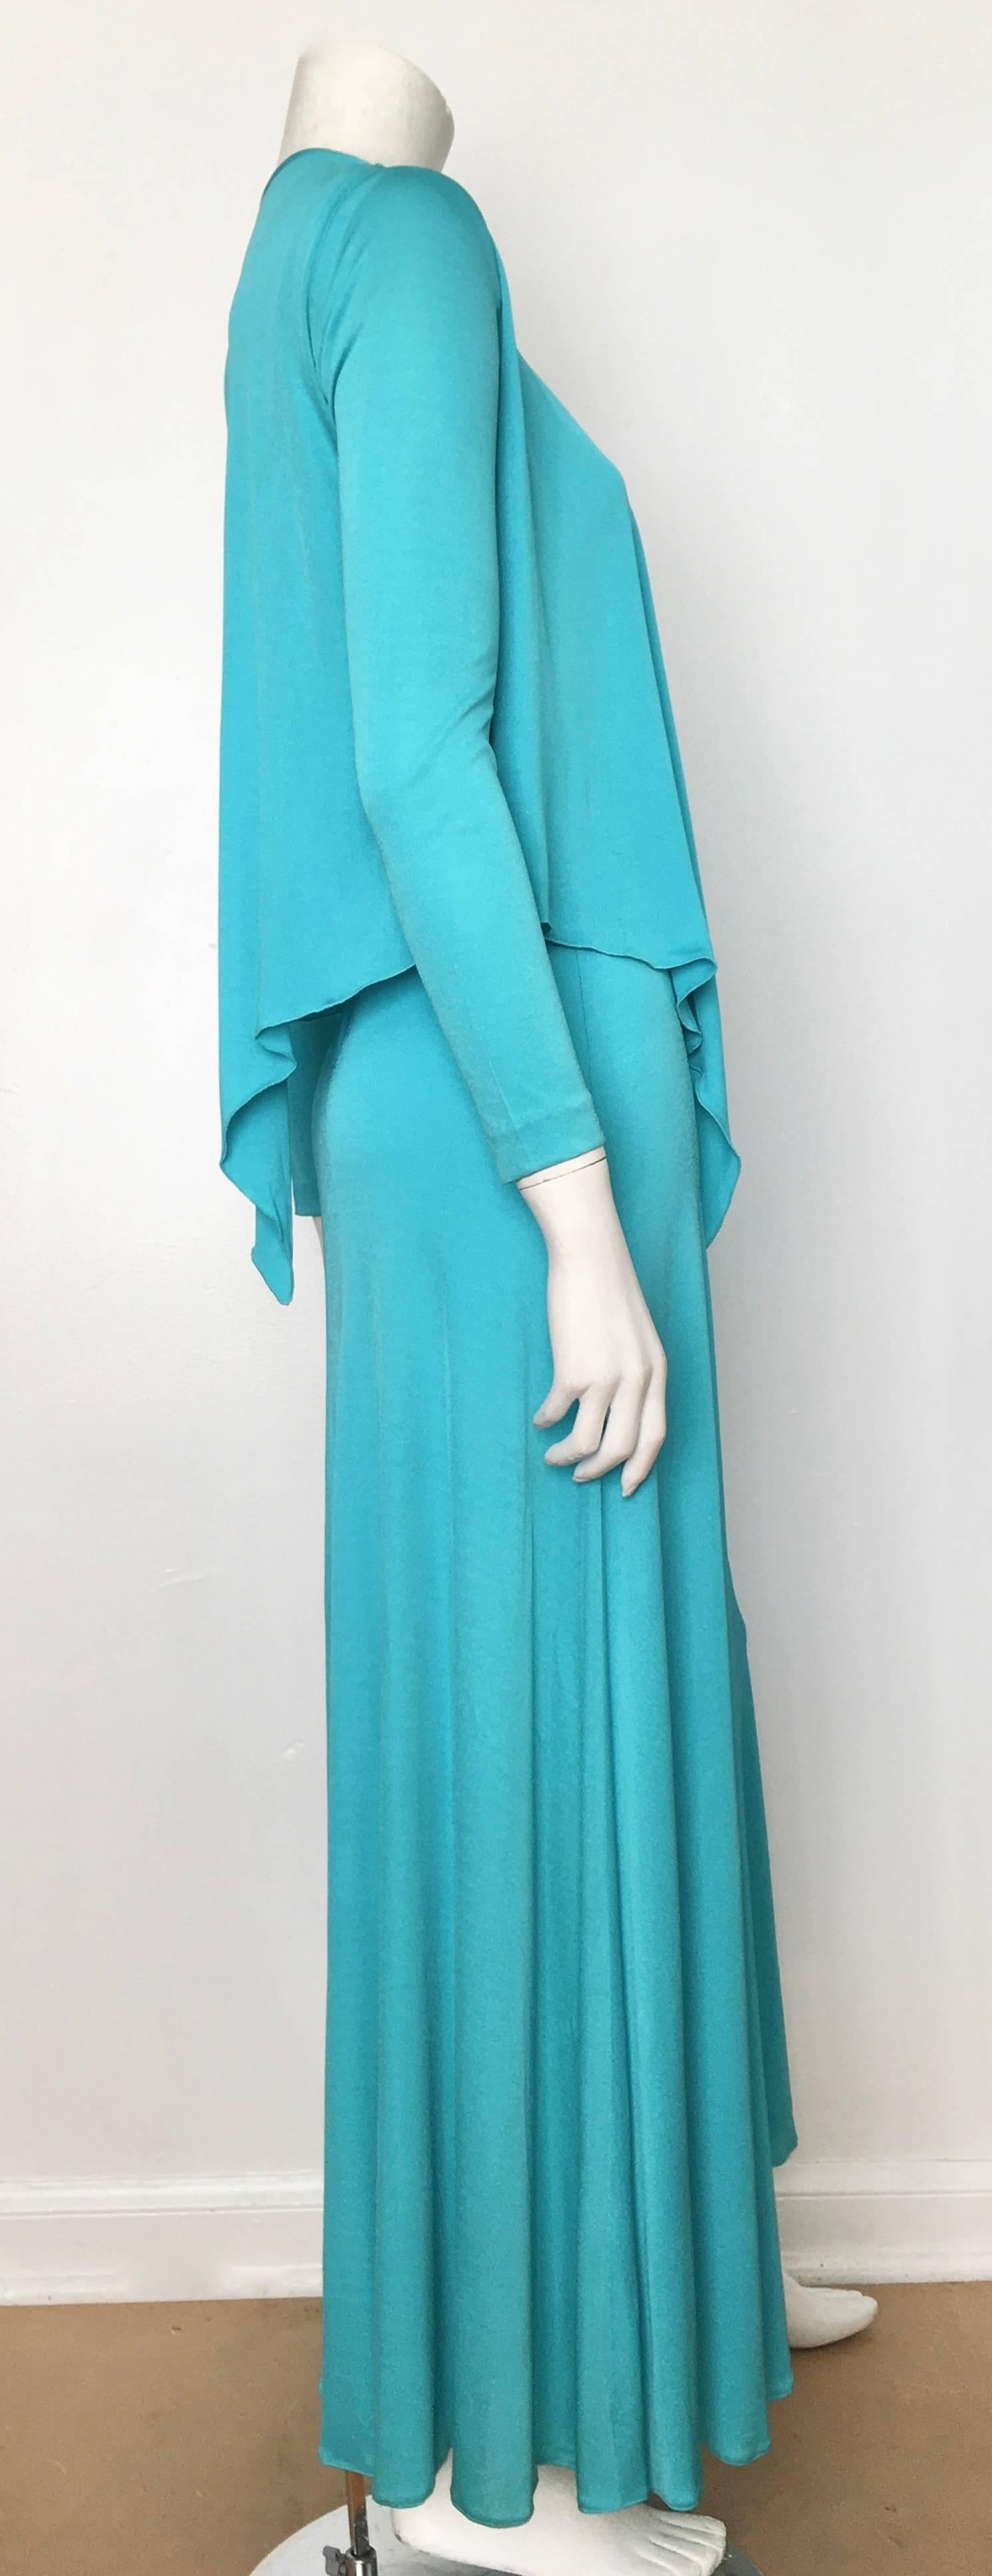 Scott Barrie 1970s Turquoise Disco Maxi Jersey Dress Size 4. In Excellent Condition For Sale In Atlanta, GA